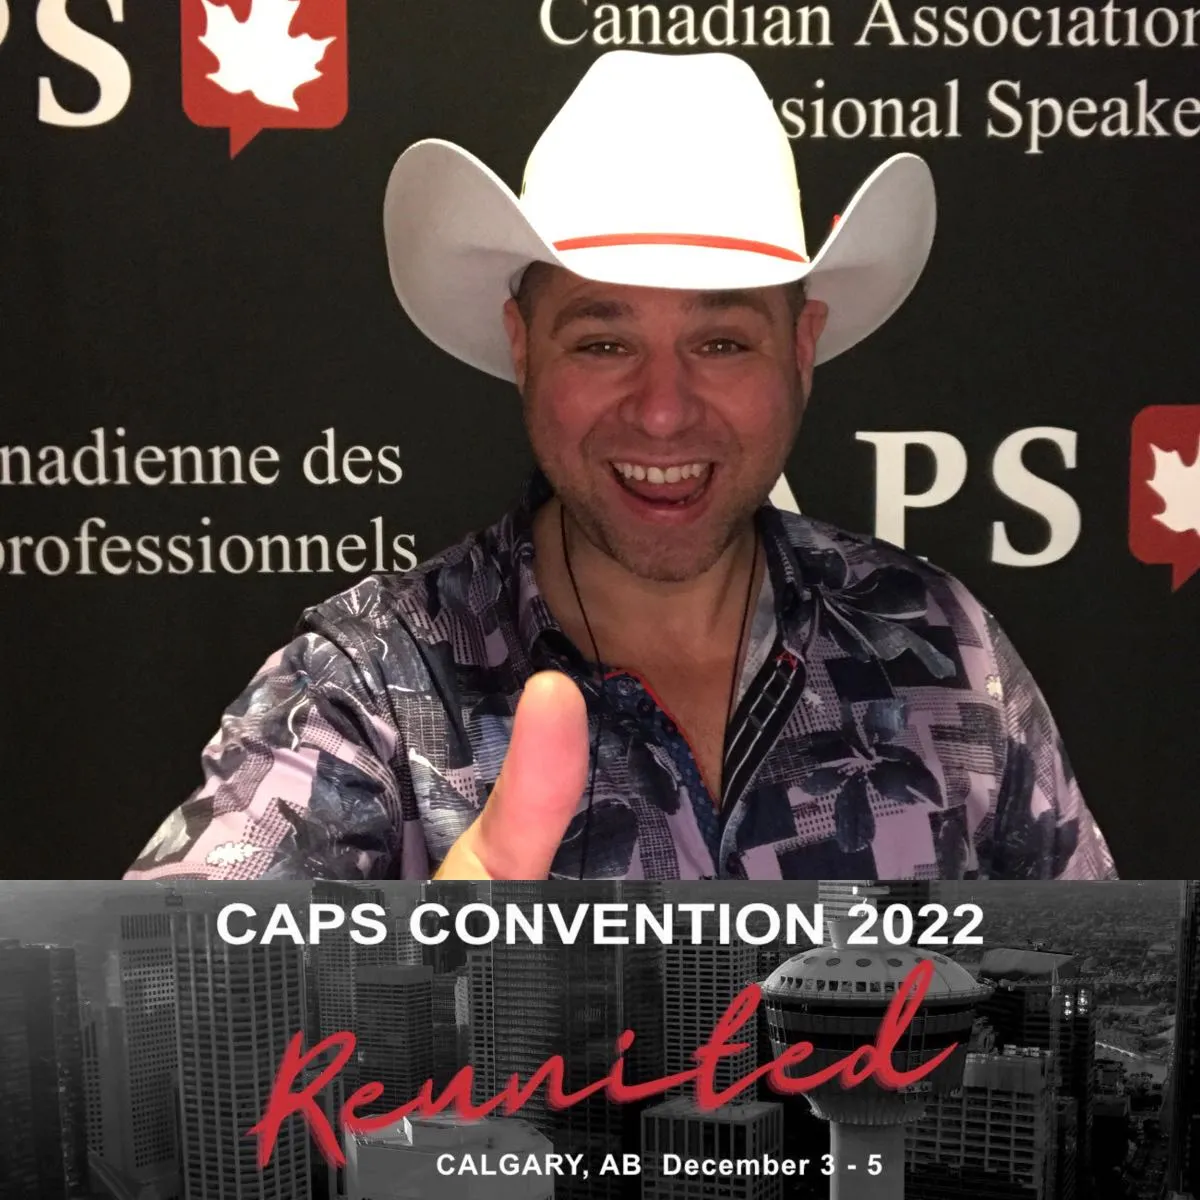 Member of The Canadian Association of Profession Speakers